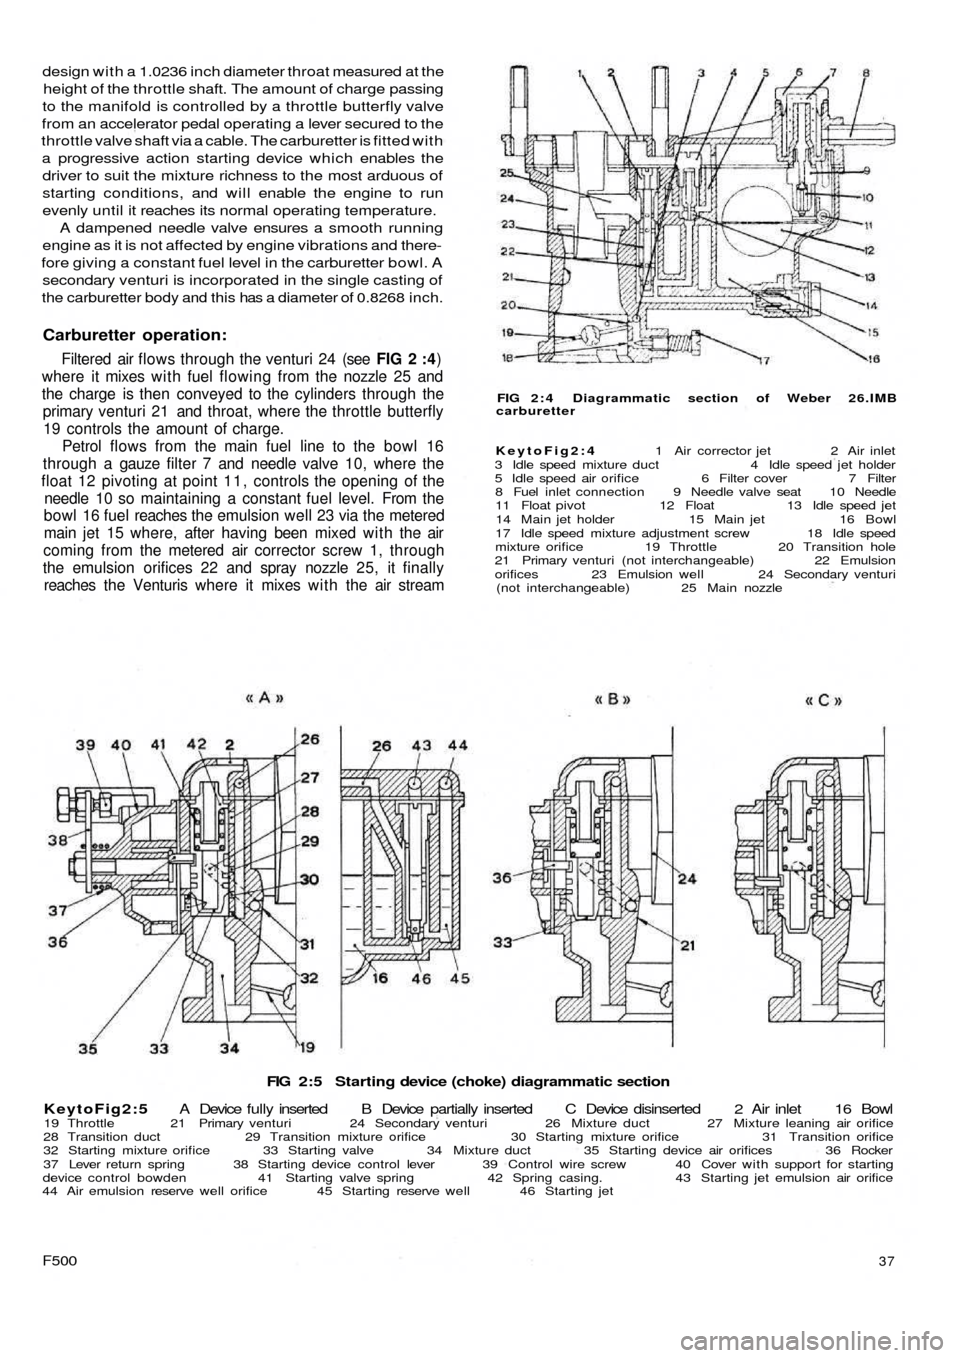 FIAT 500 1957 1.G Workshop Manual FIG 2:5  Starting device (choke) diagrammatic section
KeytoFig2:5 A  Device  fully inserted  B  Device  partially  inserted  C  Device  disinserted  2  Air  inlet 16 Bowl
19 Throttle  21 Primary ventu